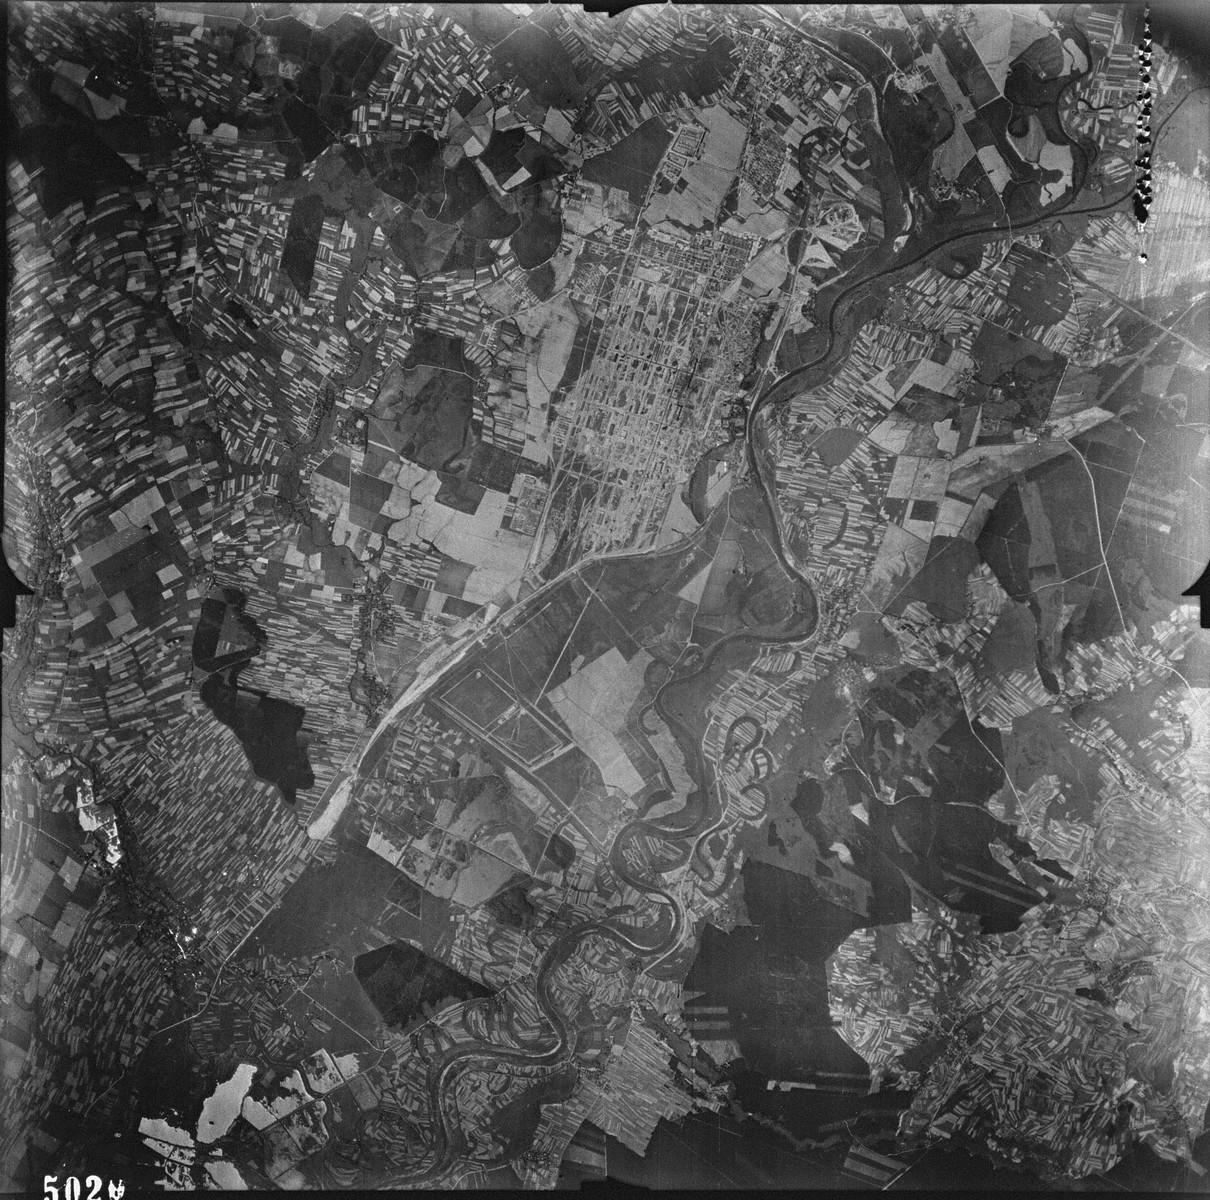 An aerial reconnaissance photograph showing Auschwitz III (Monowitz) and the IG Farben "Buna" plant. [oversized photograph]

Mission:  60 PRS/462 60 SQ;  Scale: 1/54,000;  Focal Length: 6";  Altitude: 27,000'